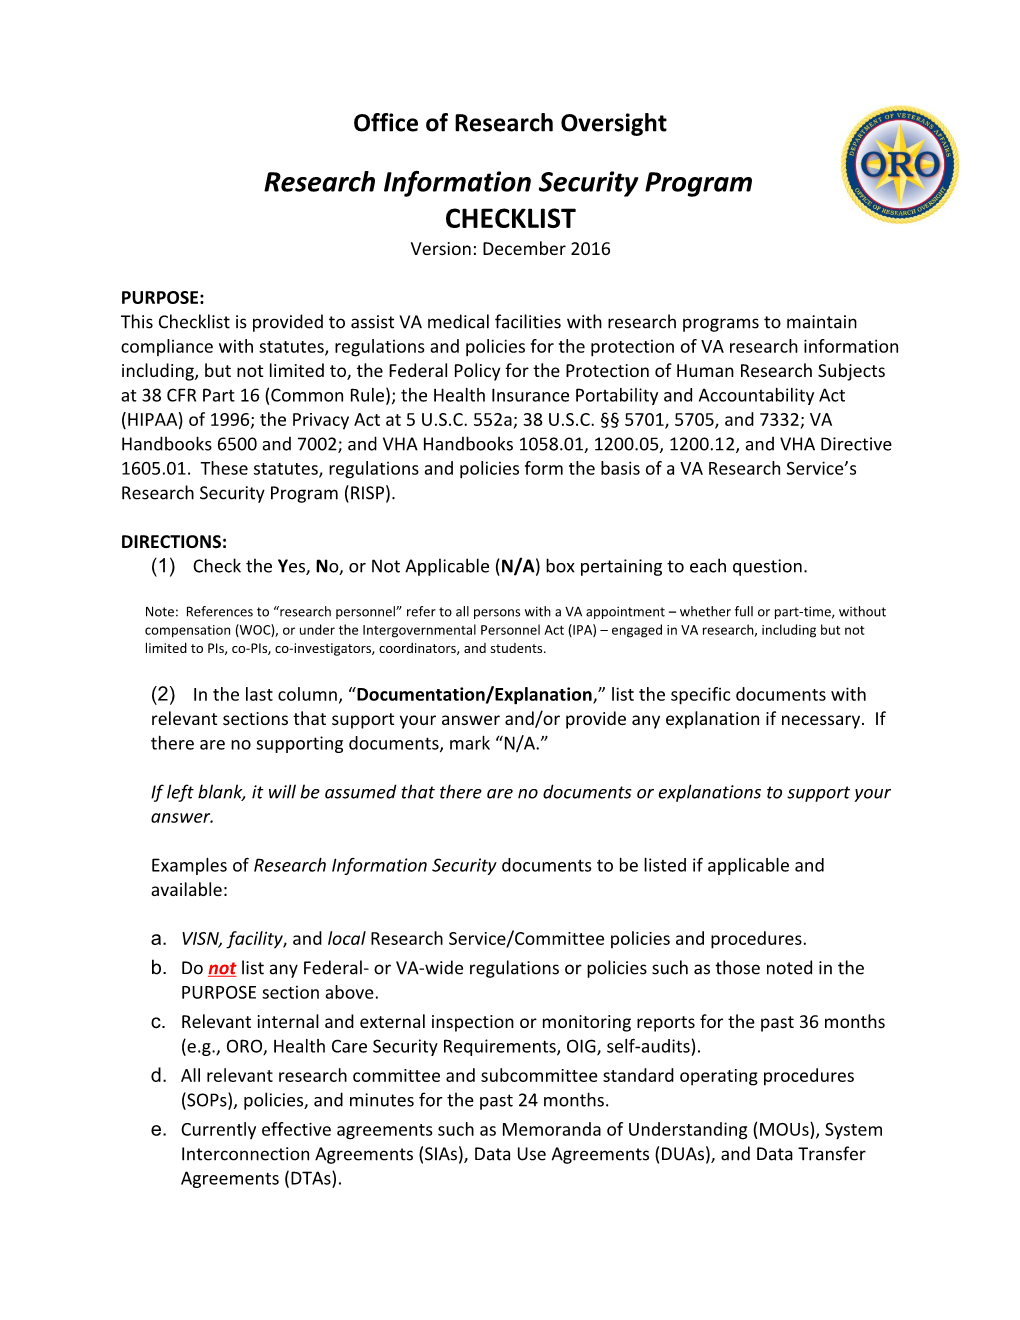 Research Information Security Program